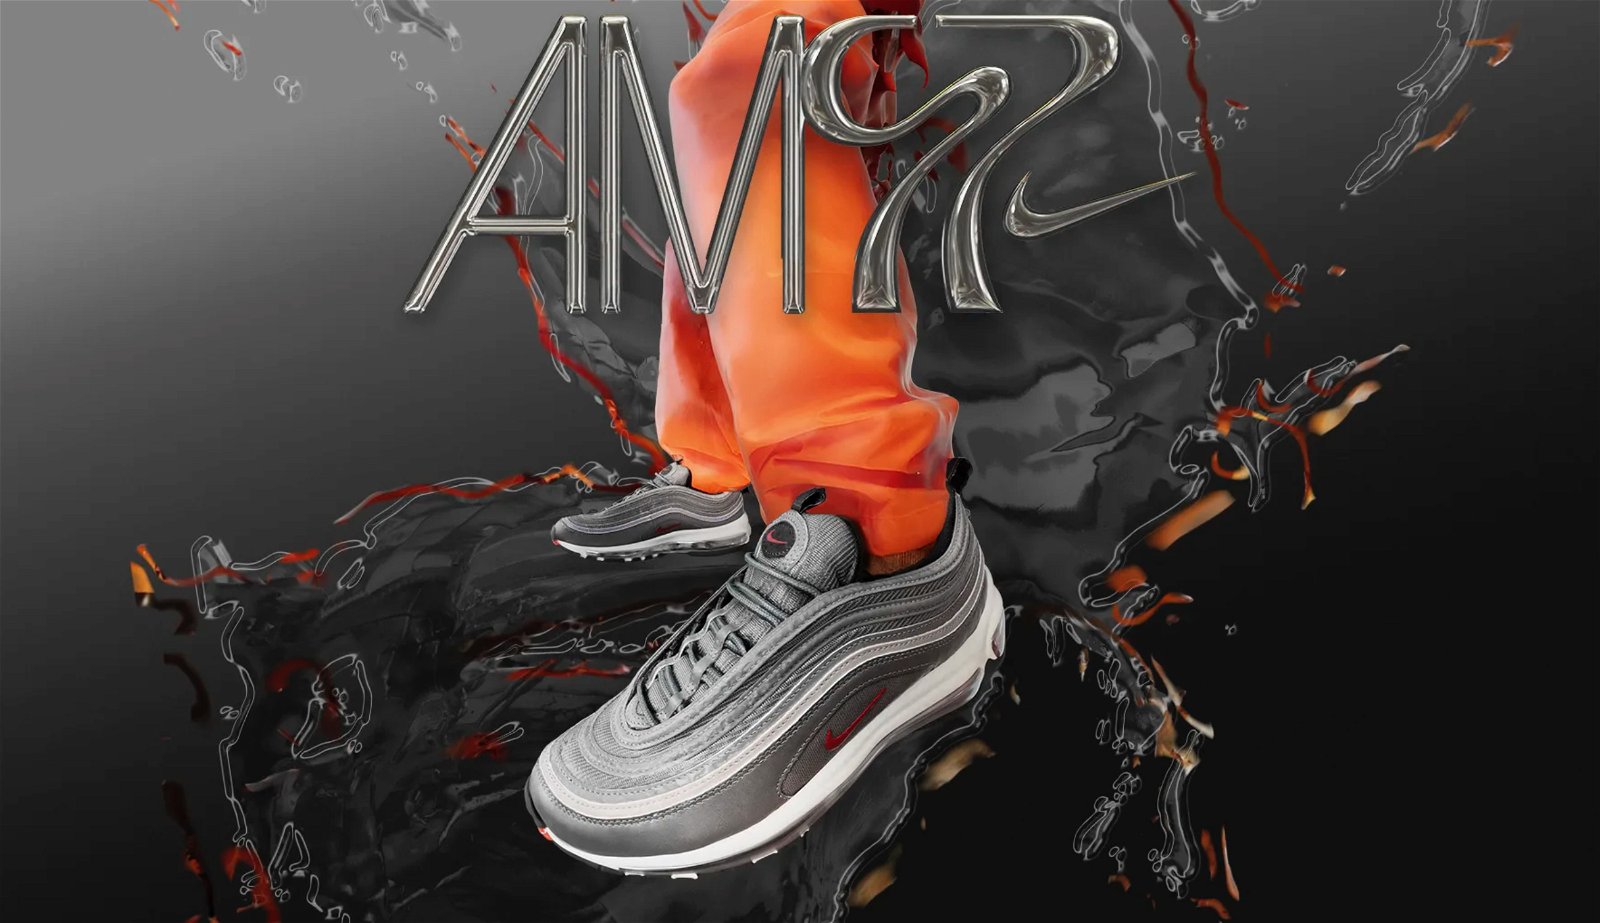 Sneakers of the Week by FlexDog - Nike Air Max 97 "Silver Bullet"